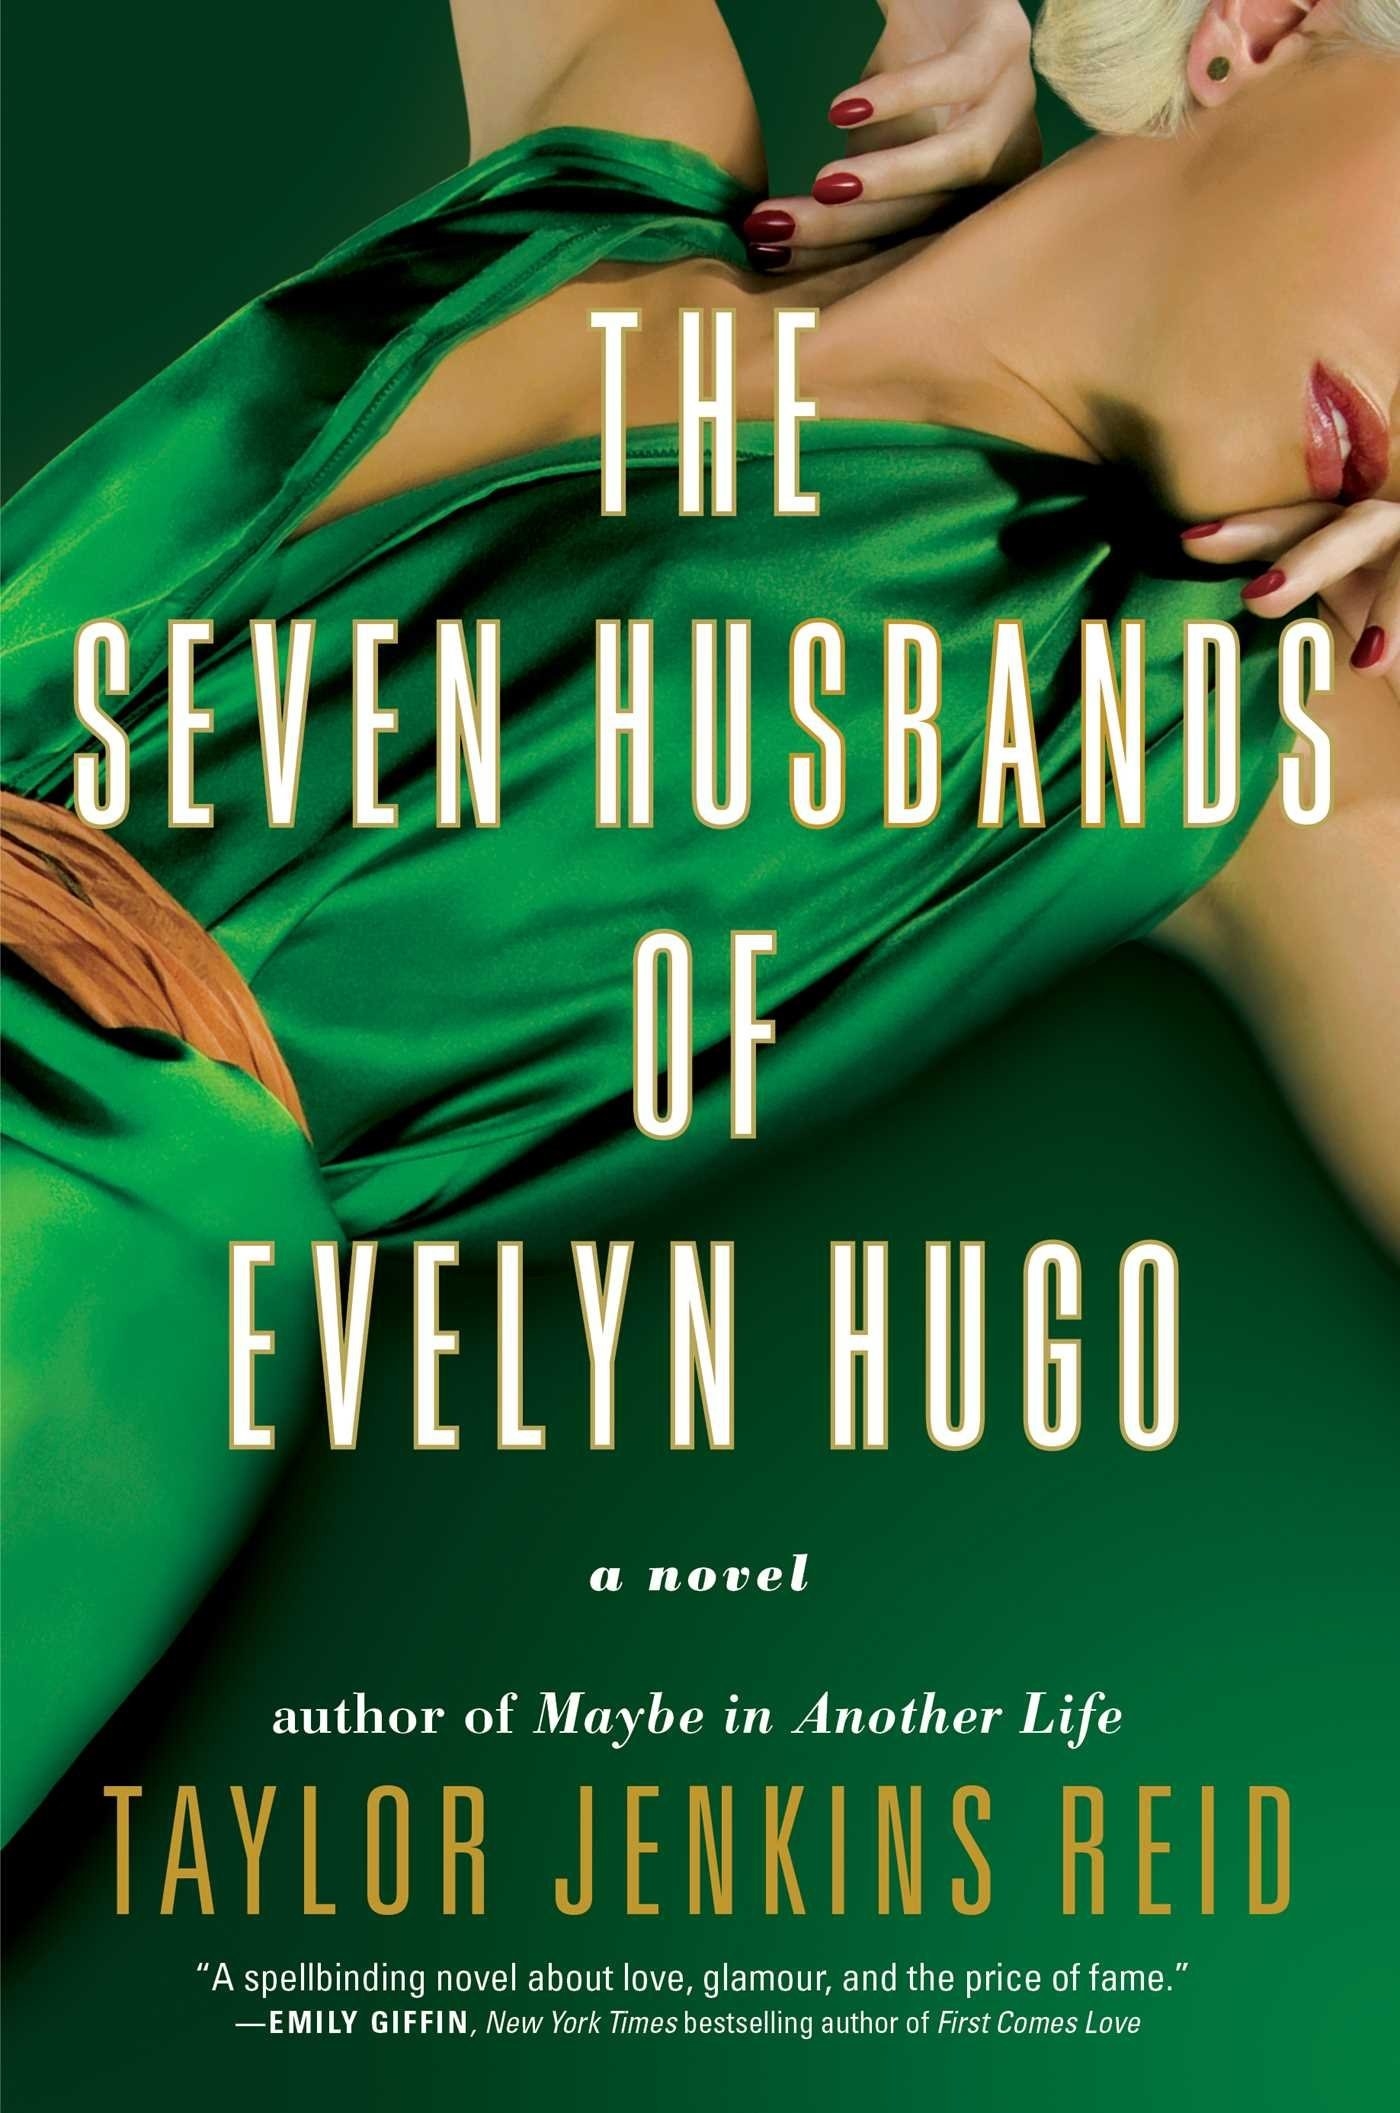 Book cover of &quot;The seven husbands of Evelyn hugo: